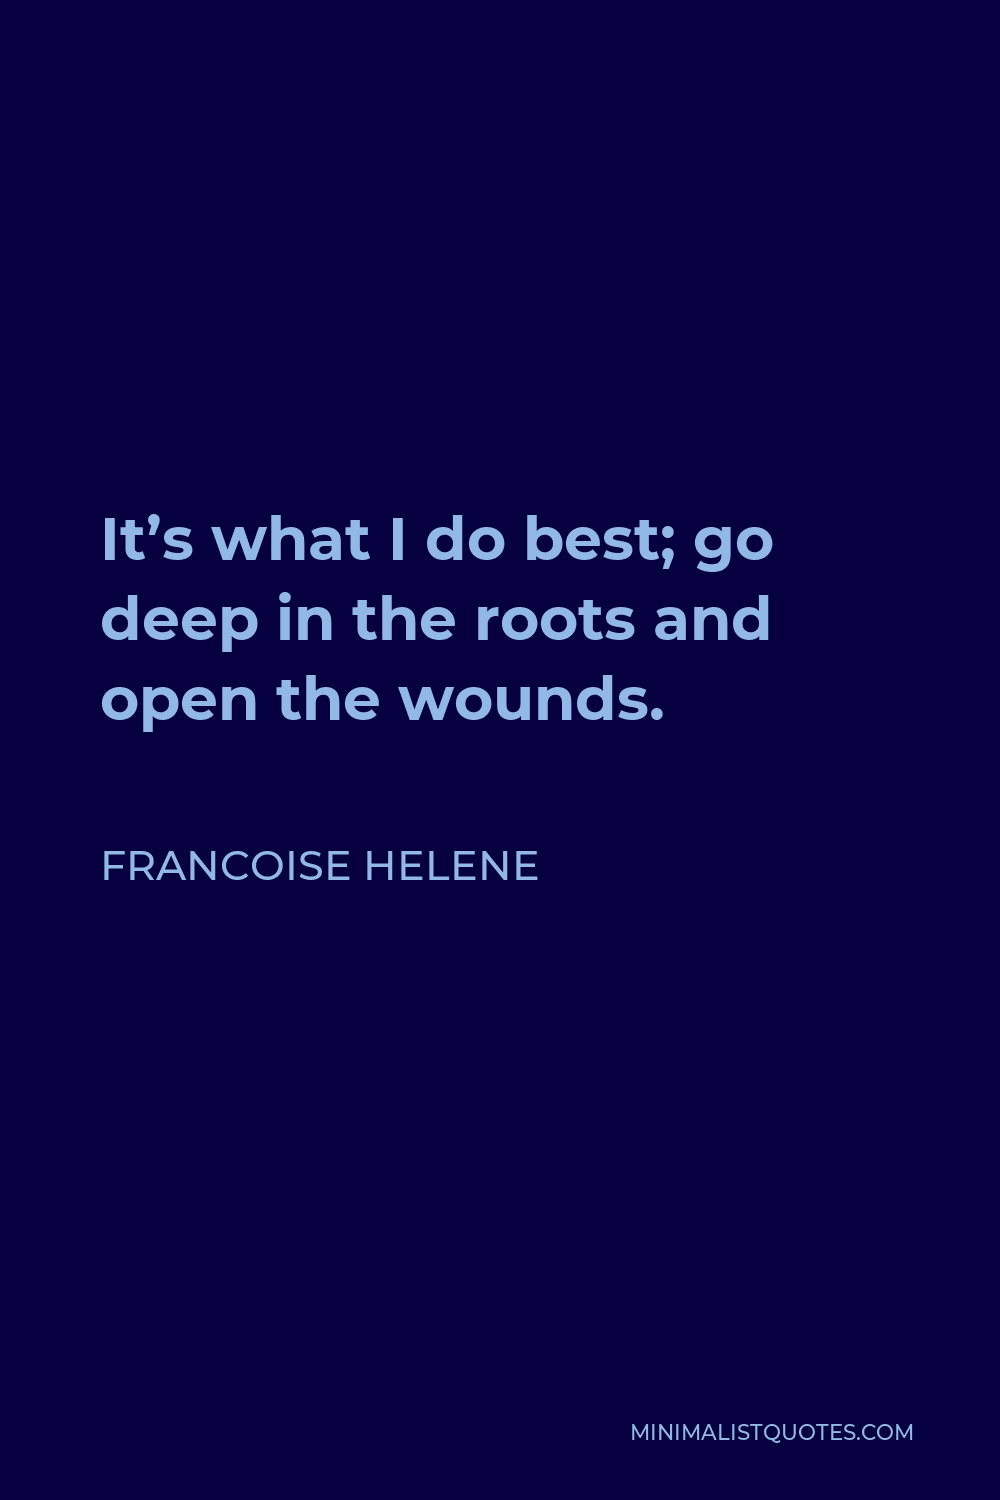 Francoise Helene Quote - It’s what I do best; go deep in the roots and open the wounds.